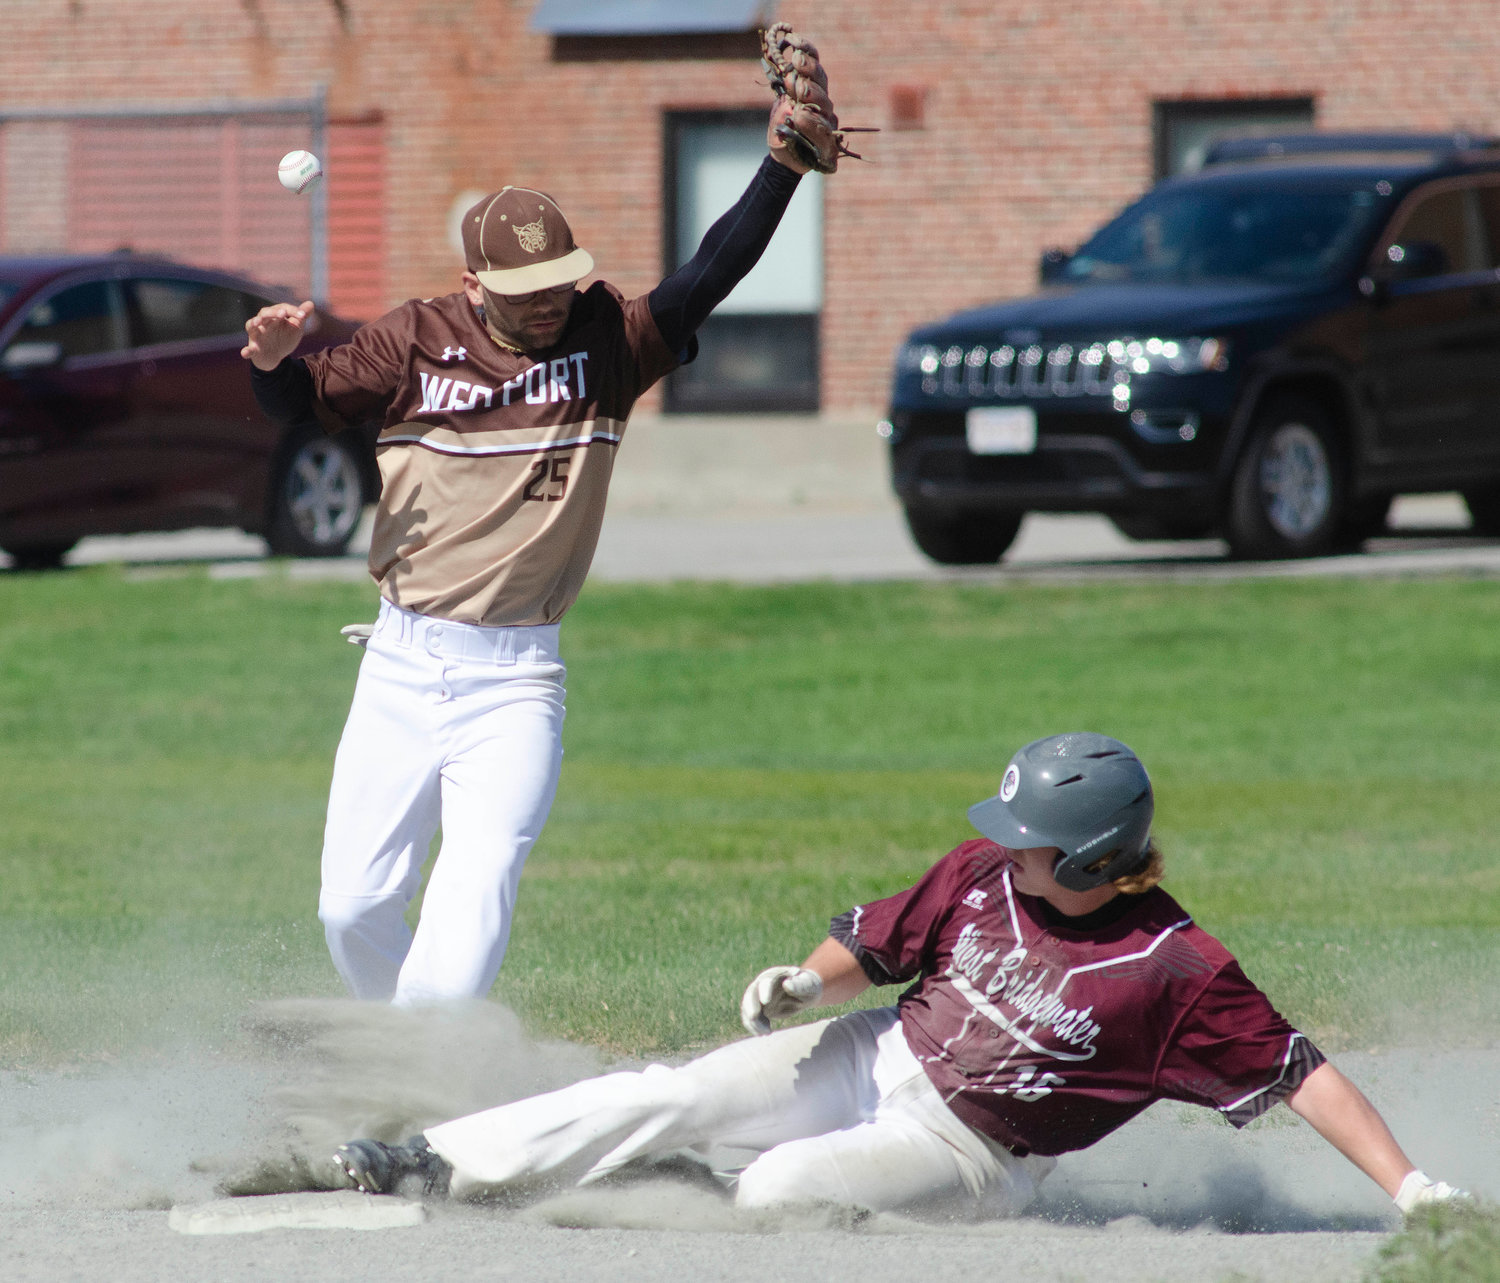 Second baseman Nick Arruda attempts to snare a throw as a West Bridgwater base runner steals second base.